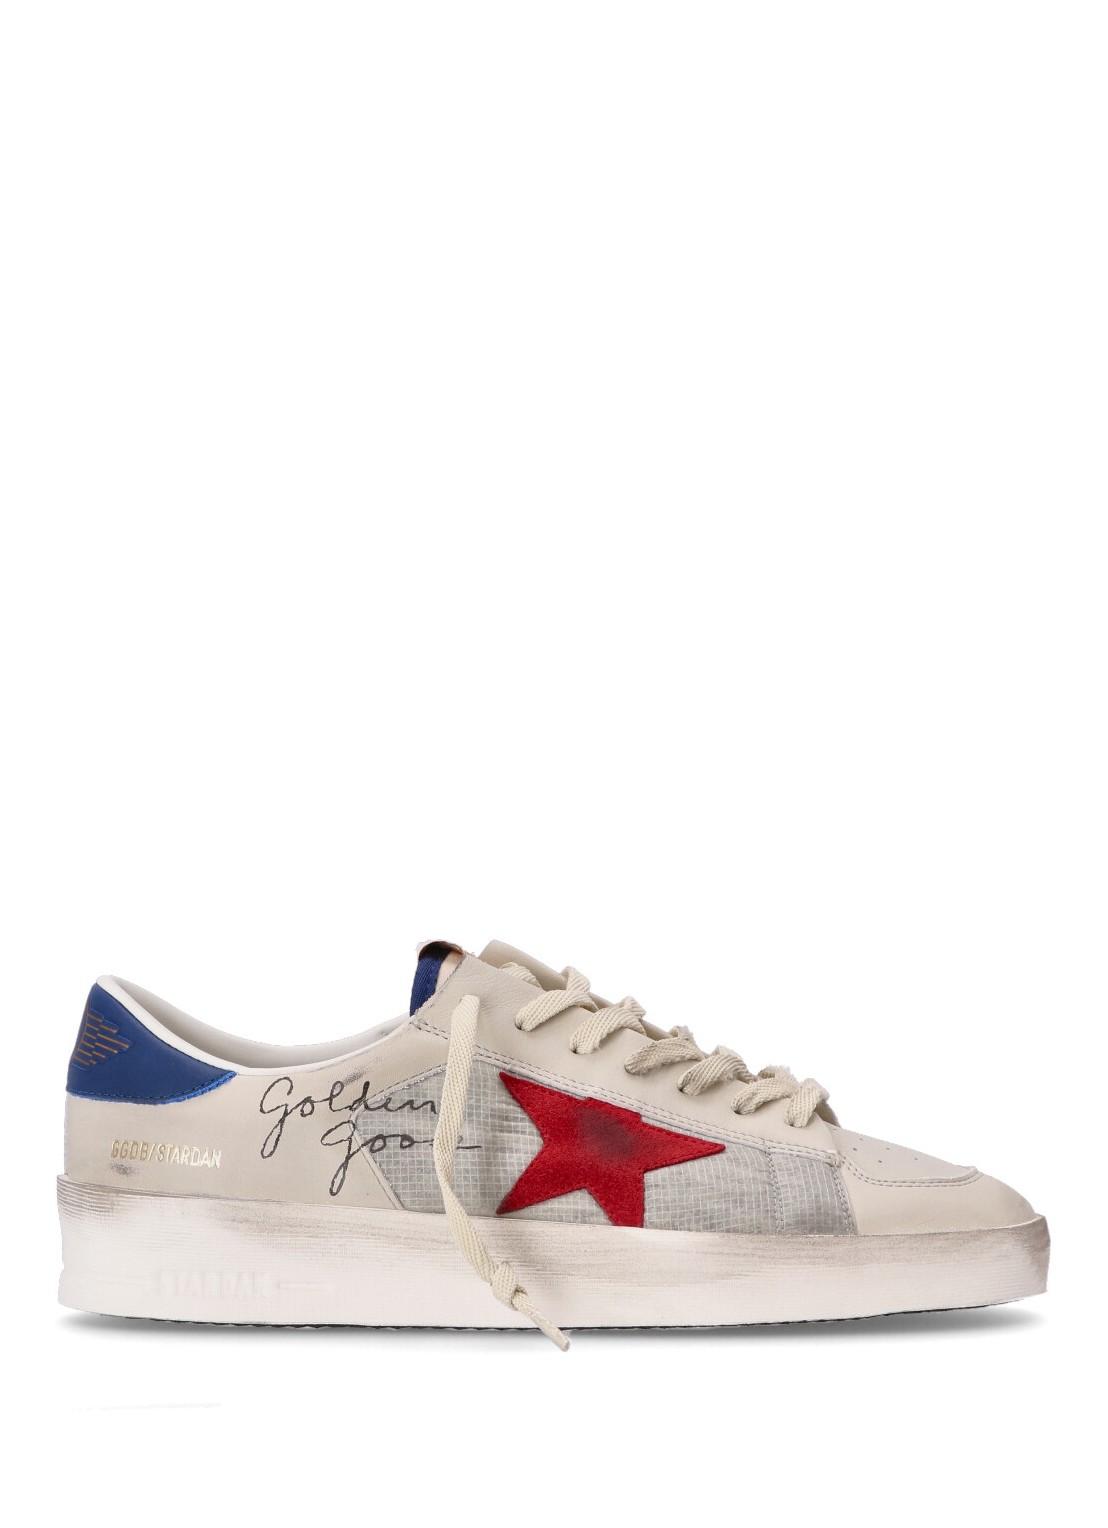 STARDAN NYLON AND LEATHER UPPER SUEDE STAR LEATHER HEEL